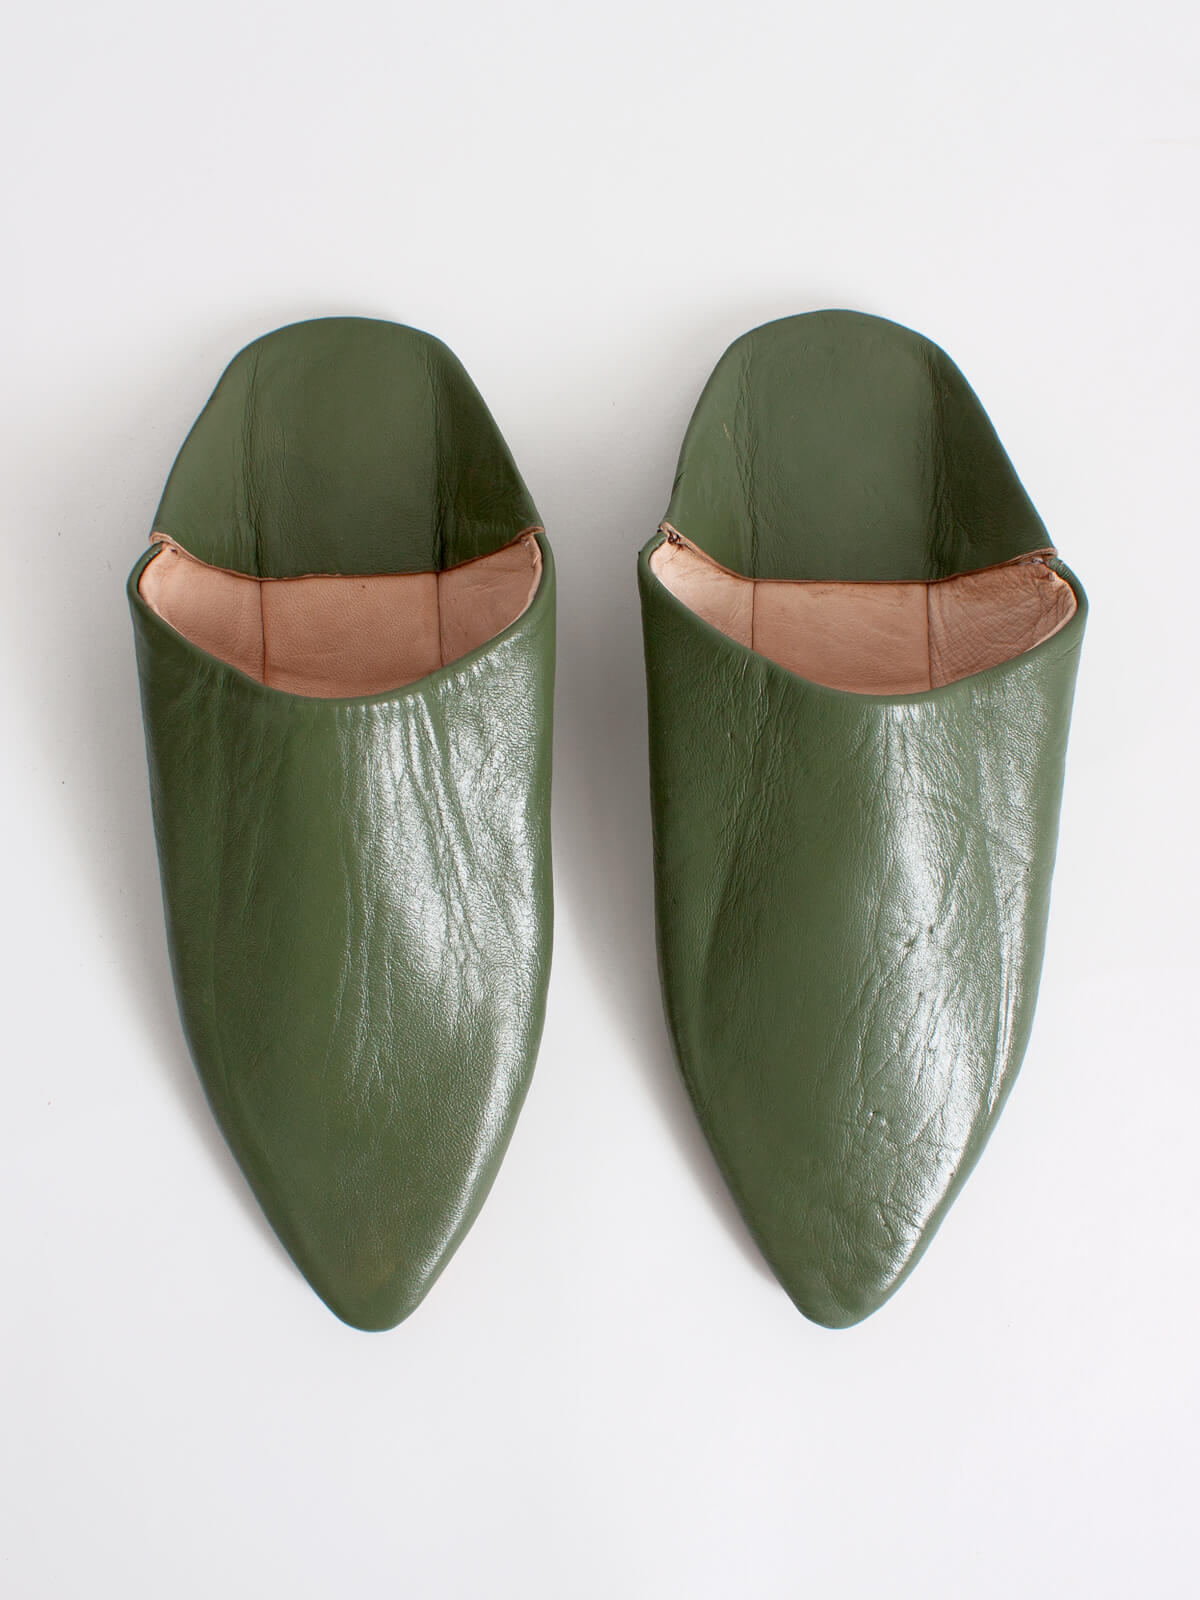 Moroccan Classic Pointed Babouche Slippers, Olive